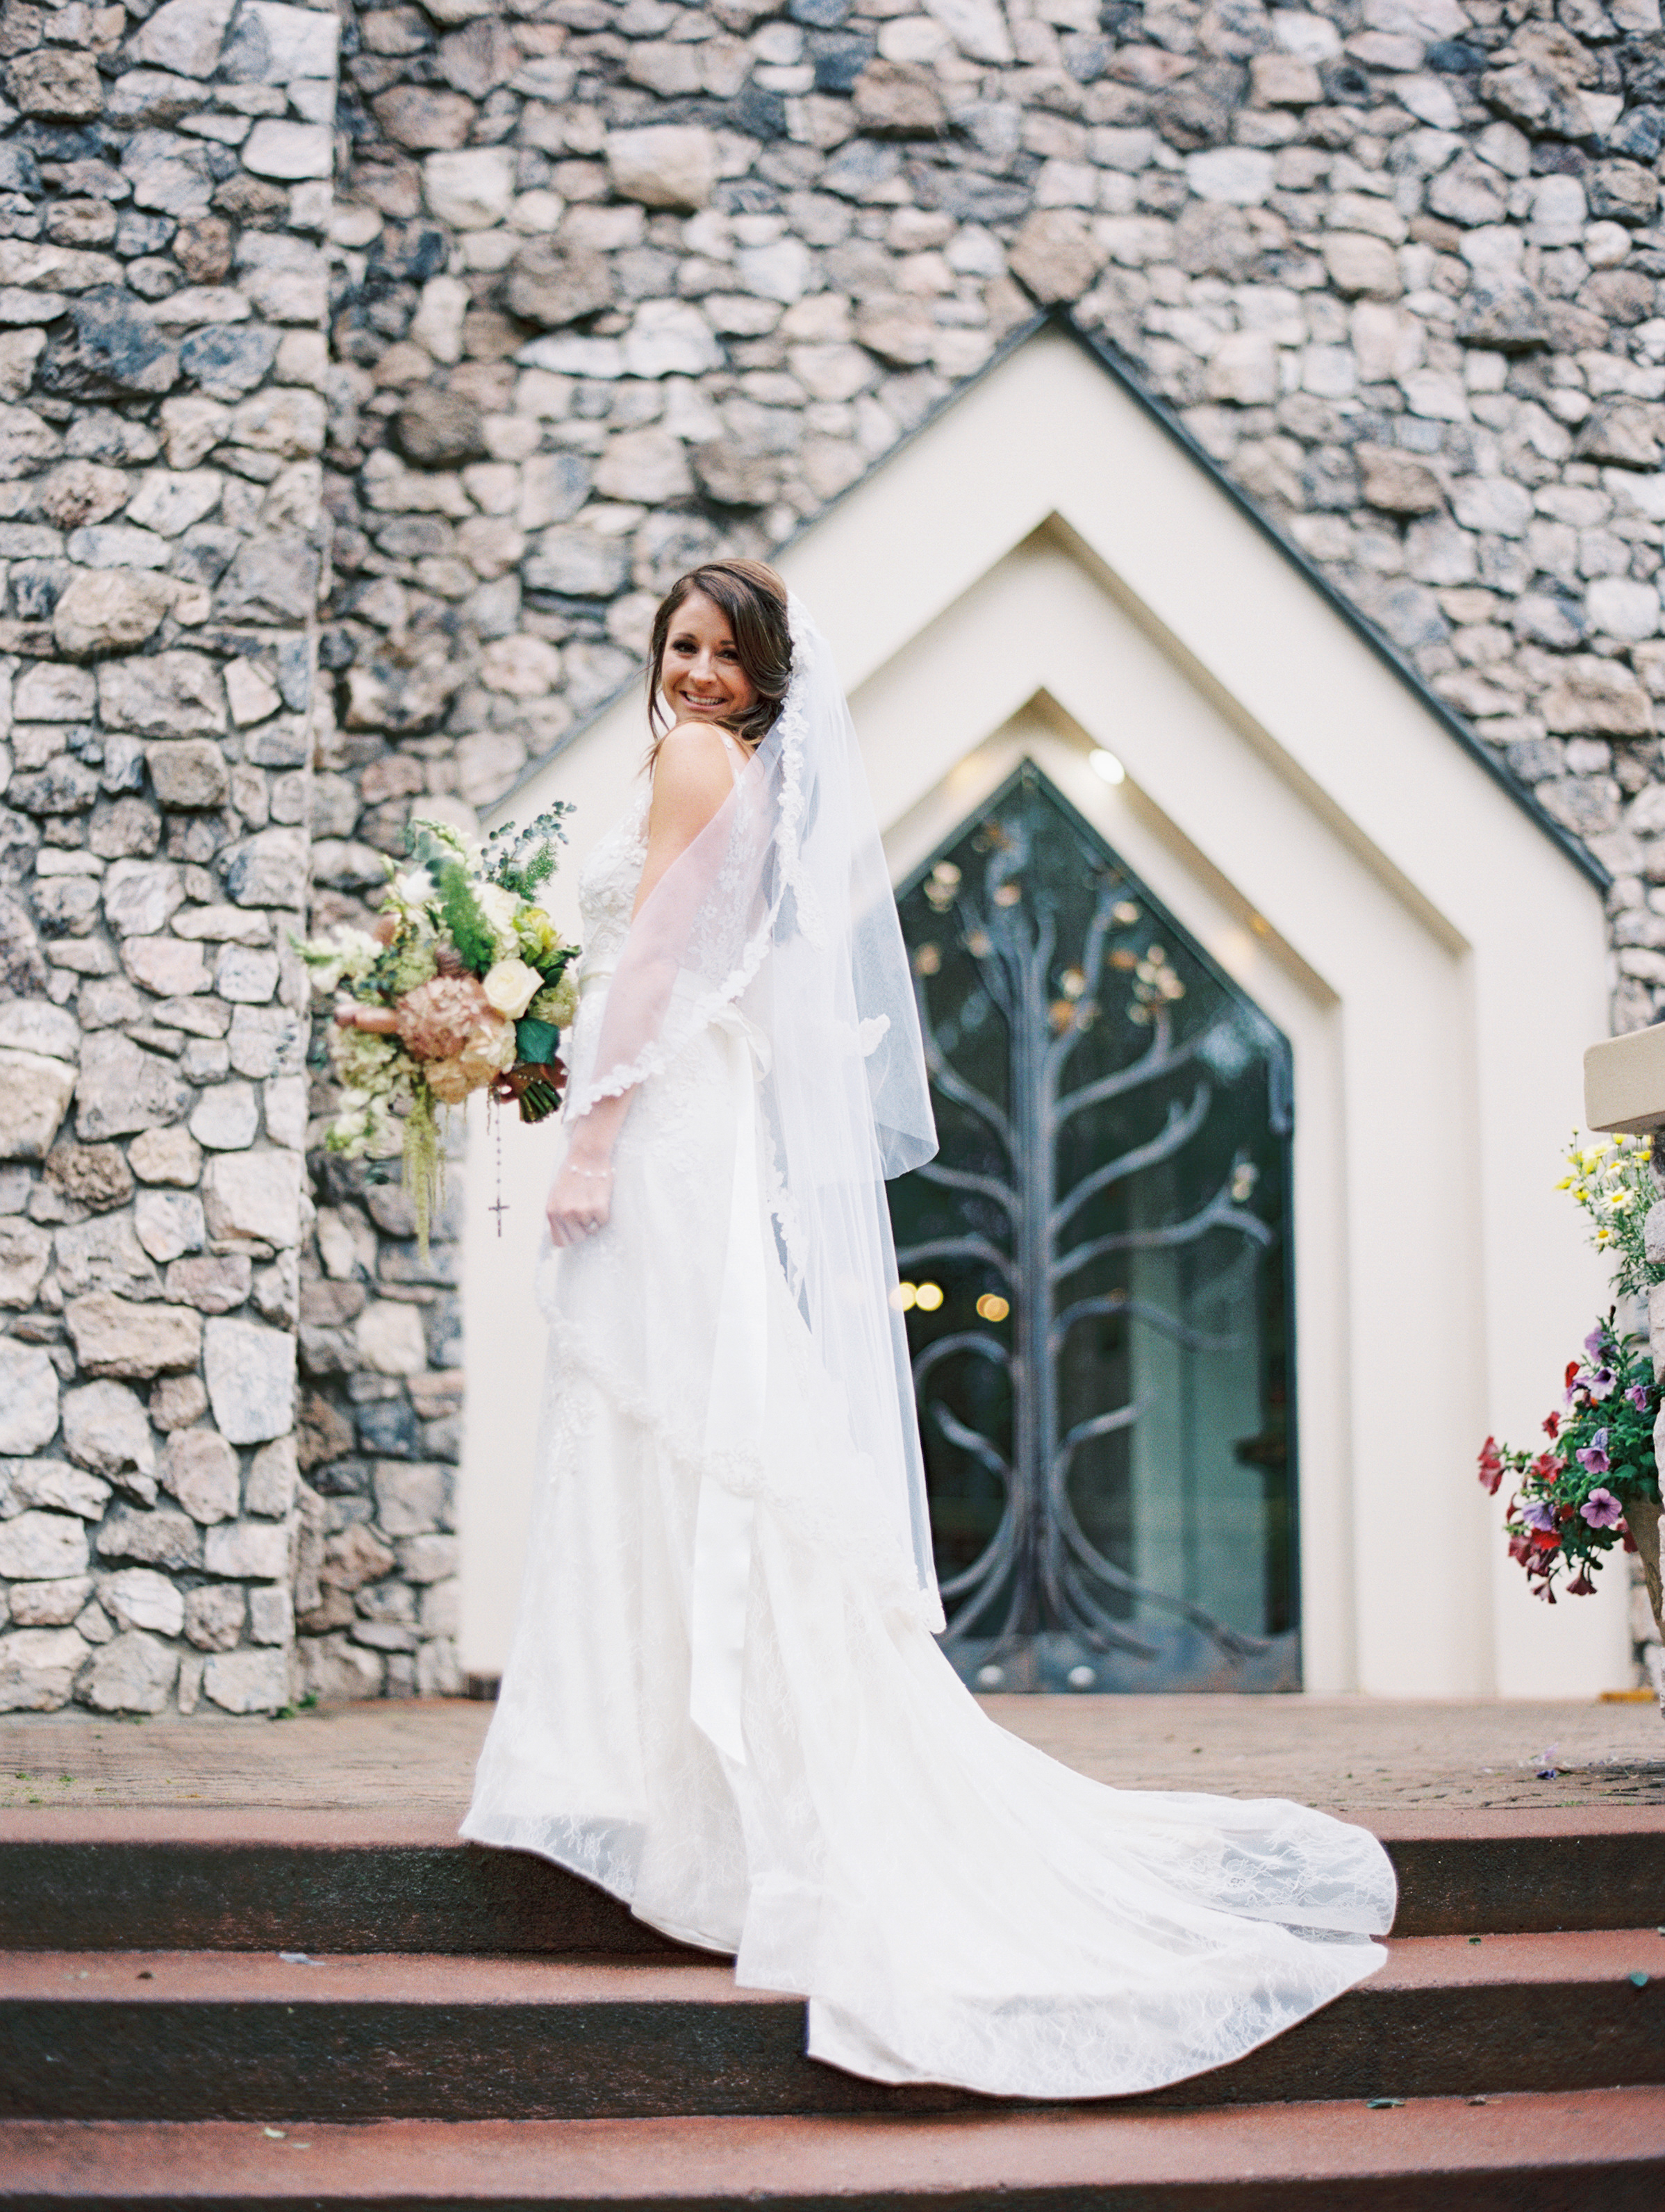  Leslie + Tyler | Liancarlo 6815 gown and Sassi Holford sash both from Little White Dress Bridal Shop in Denver |&nbsp; Cassidy Brooke Photography  